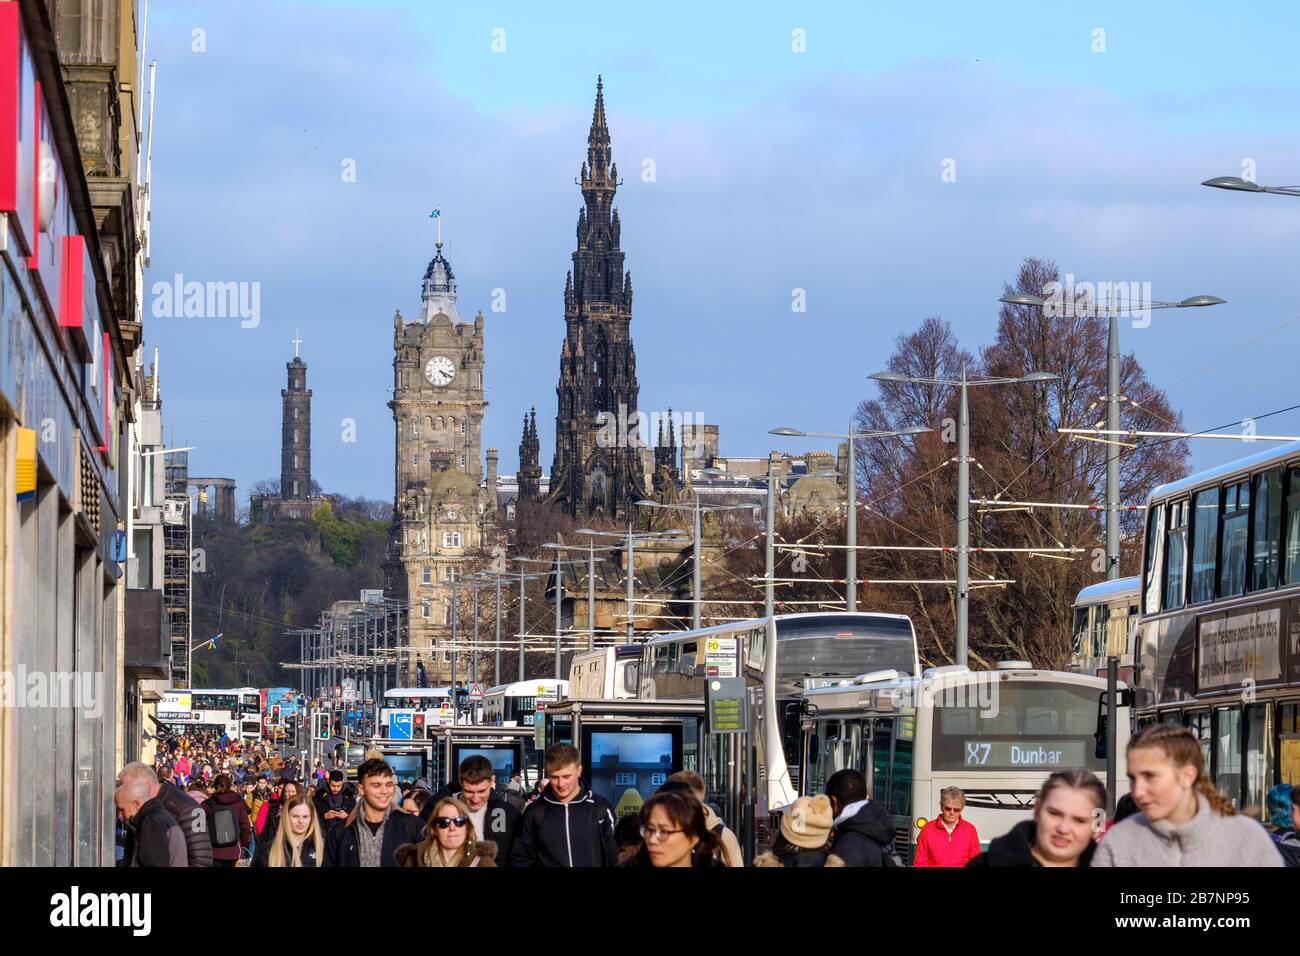 The Nelson Monument, Balmoral Hotel and Scott Monument  tower over shoppers and pedestrians on Princess Street, the main shopping street in Edinburgh city centre. Stock Photo